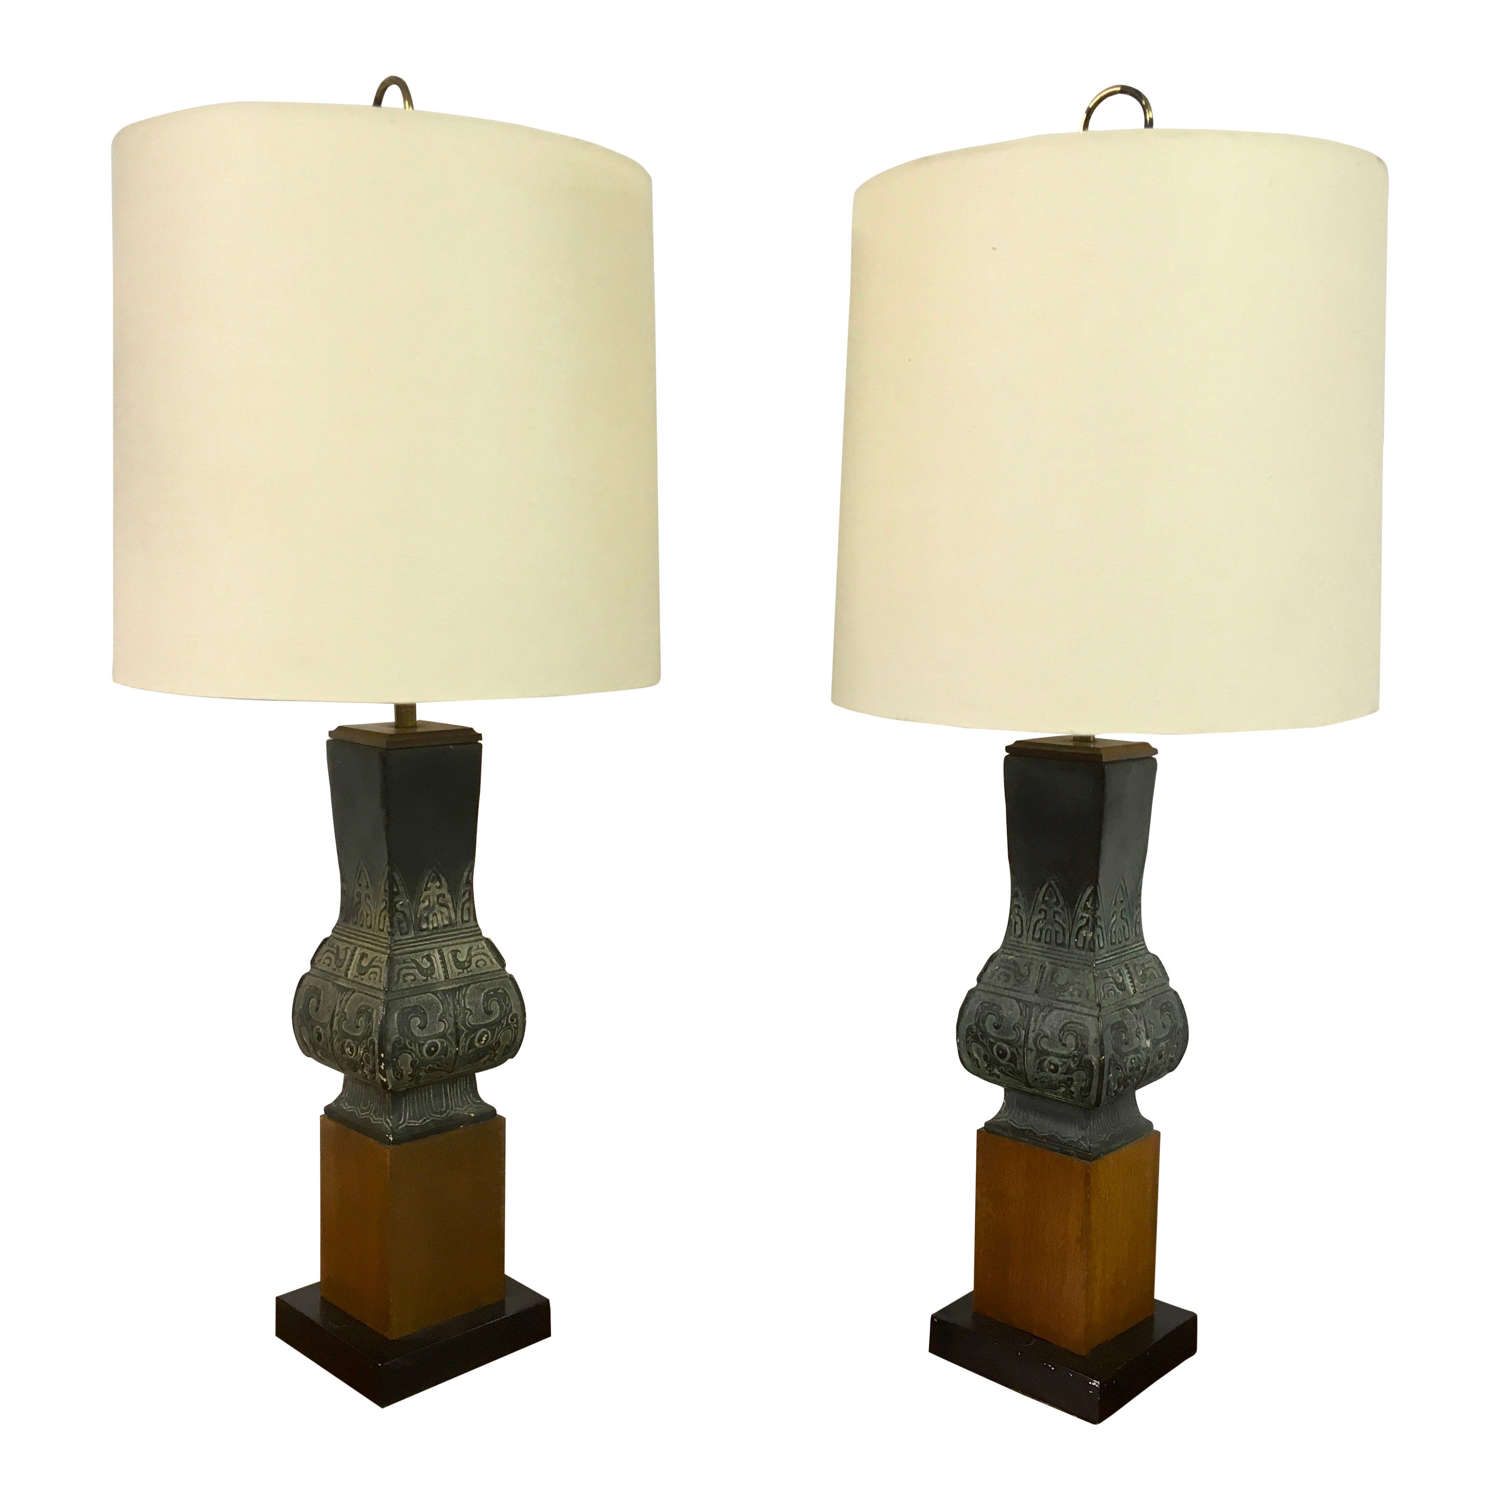 A pair of Mid Century ceramic chinoiserie style table lamps